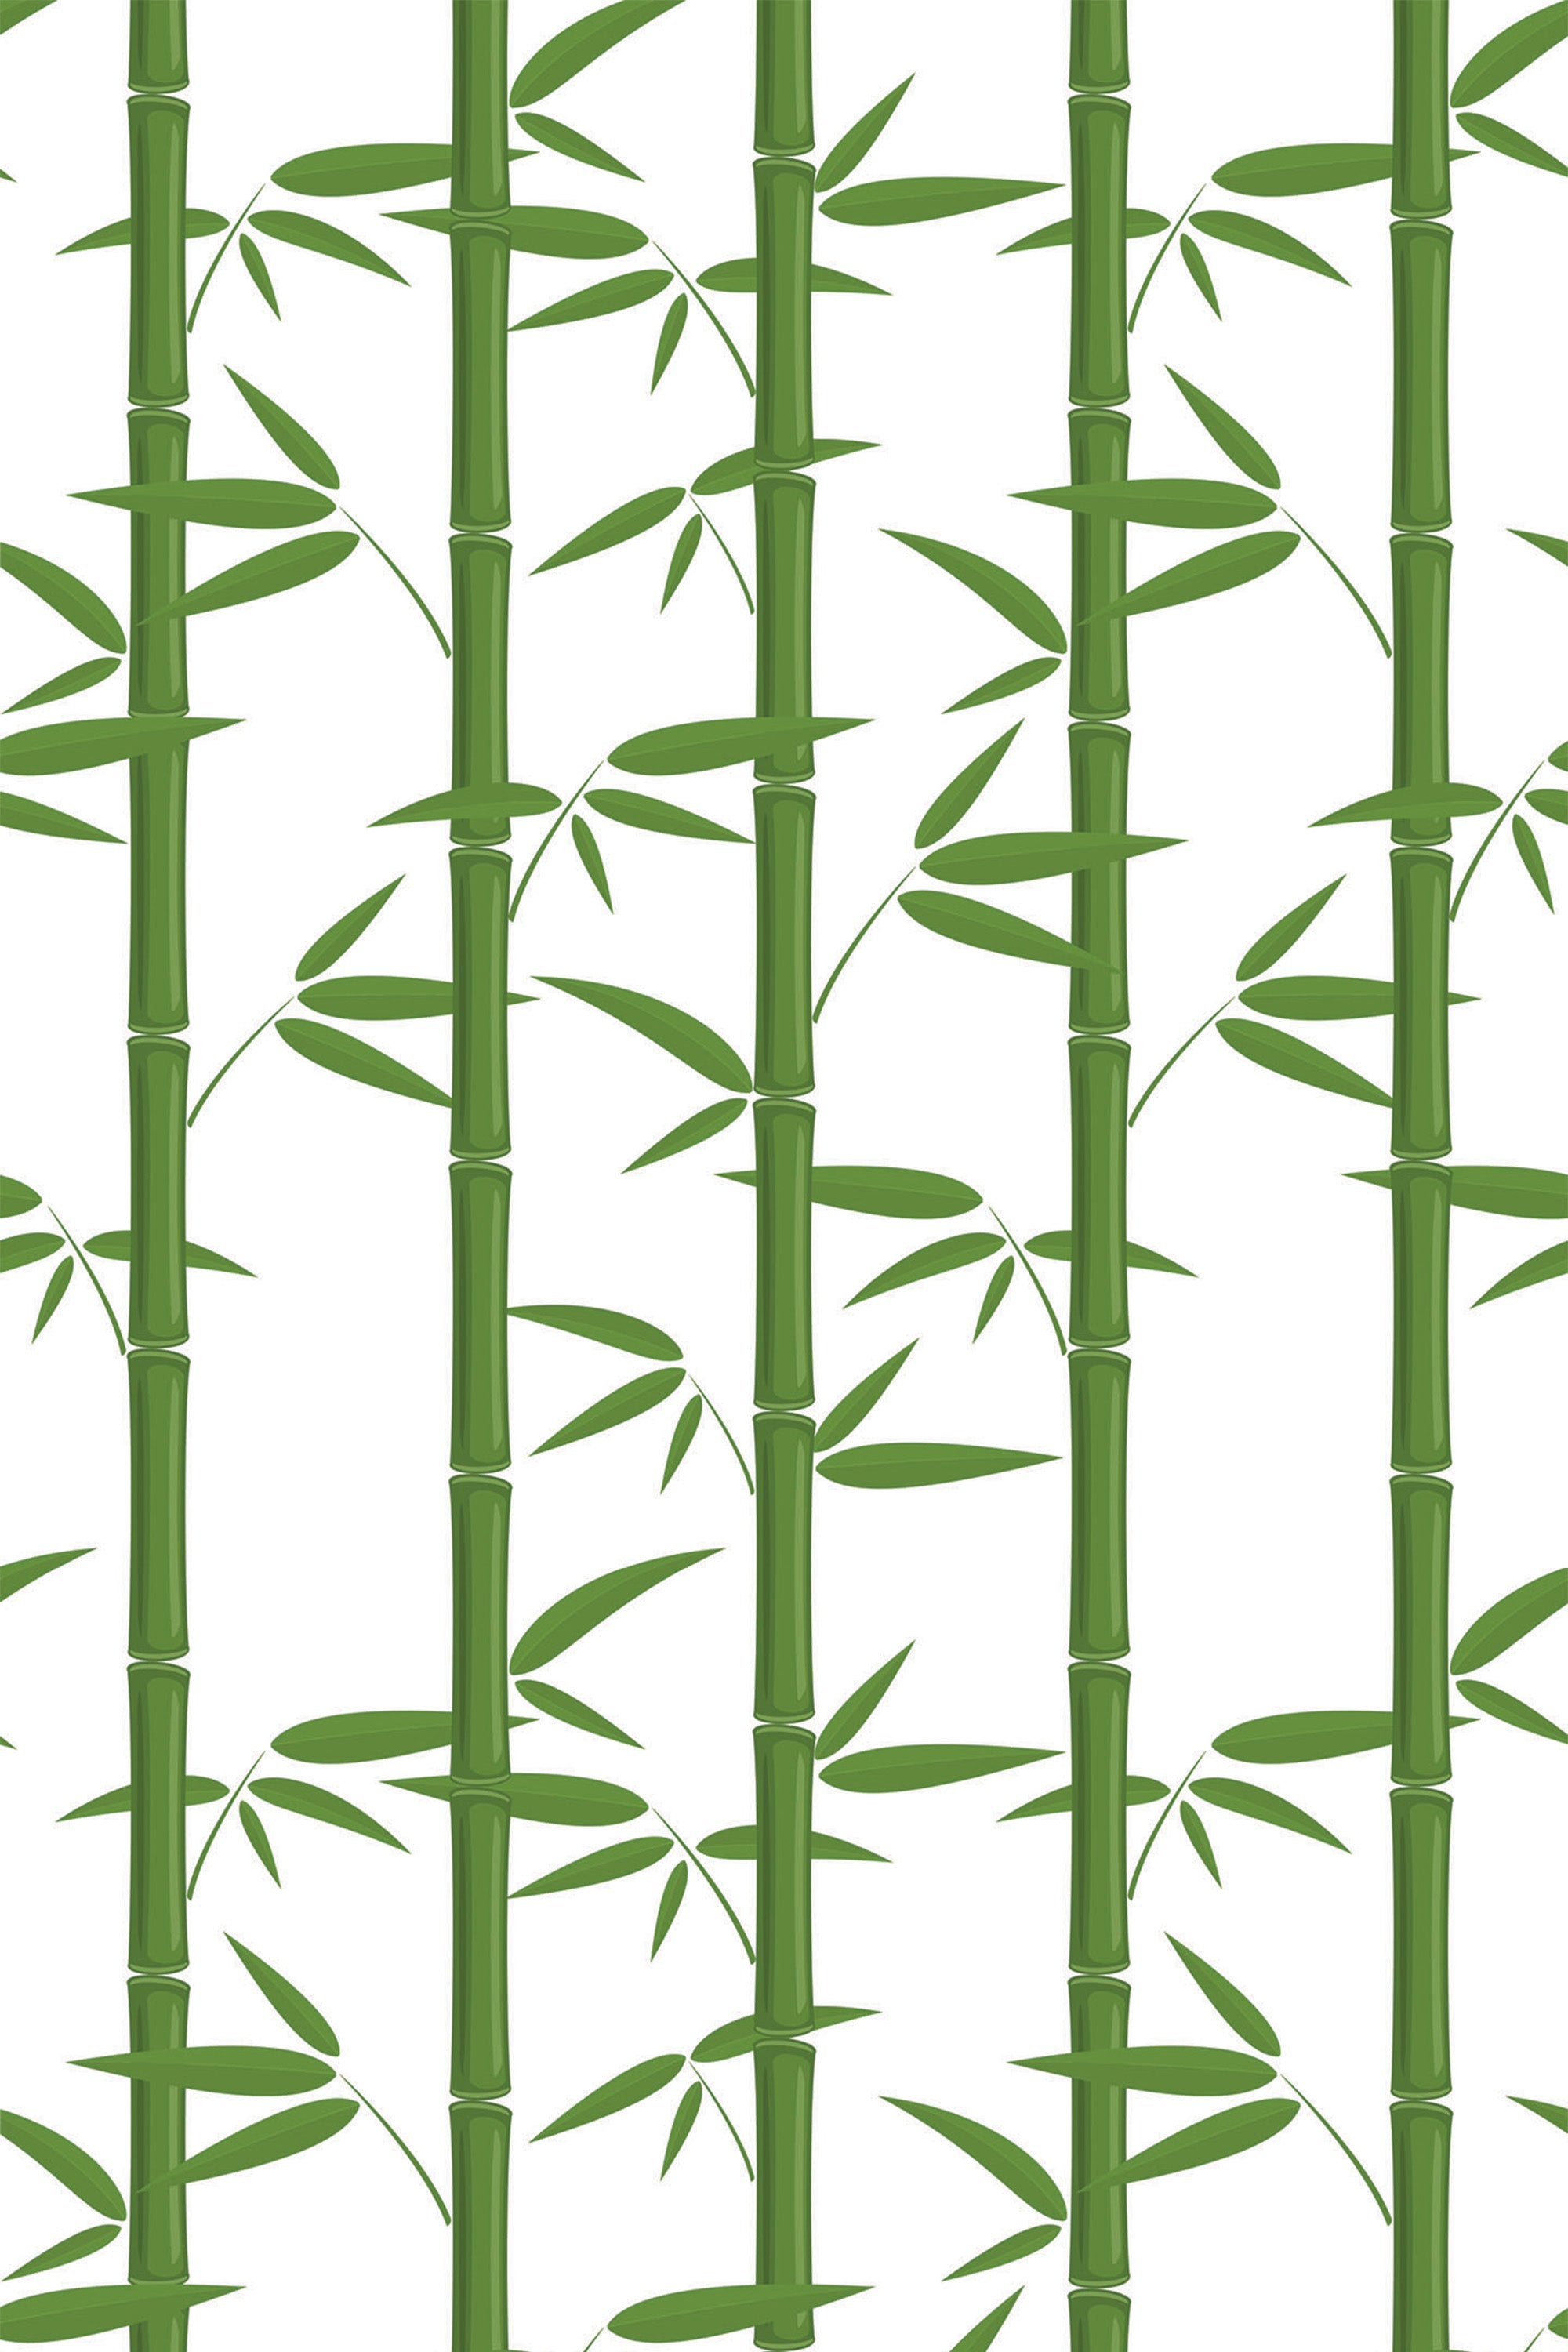 Bamboo Wallpaper Contact Paper Peel and Stick Self Adhesive Removable Green